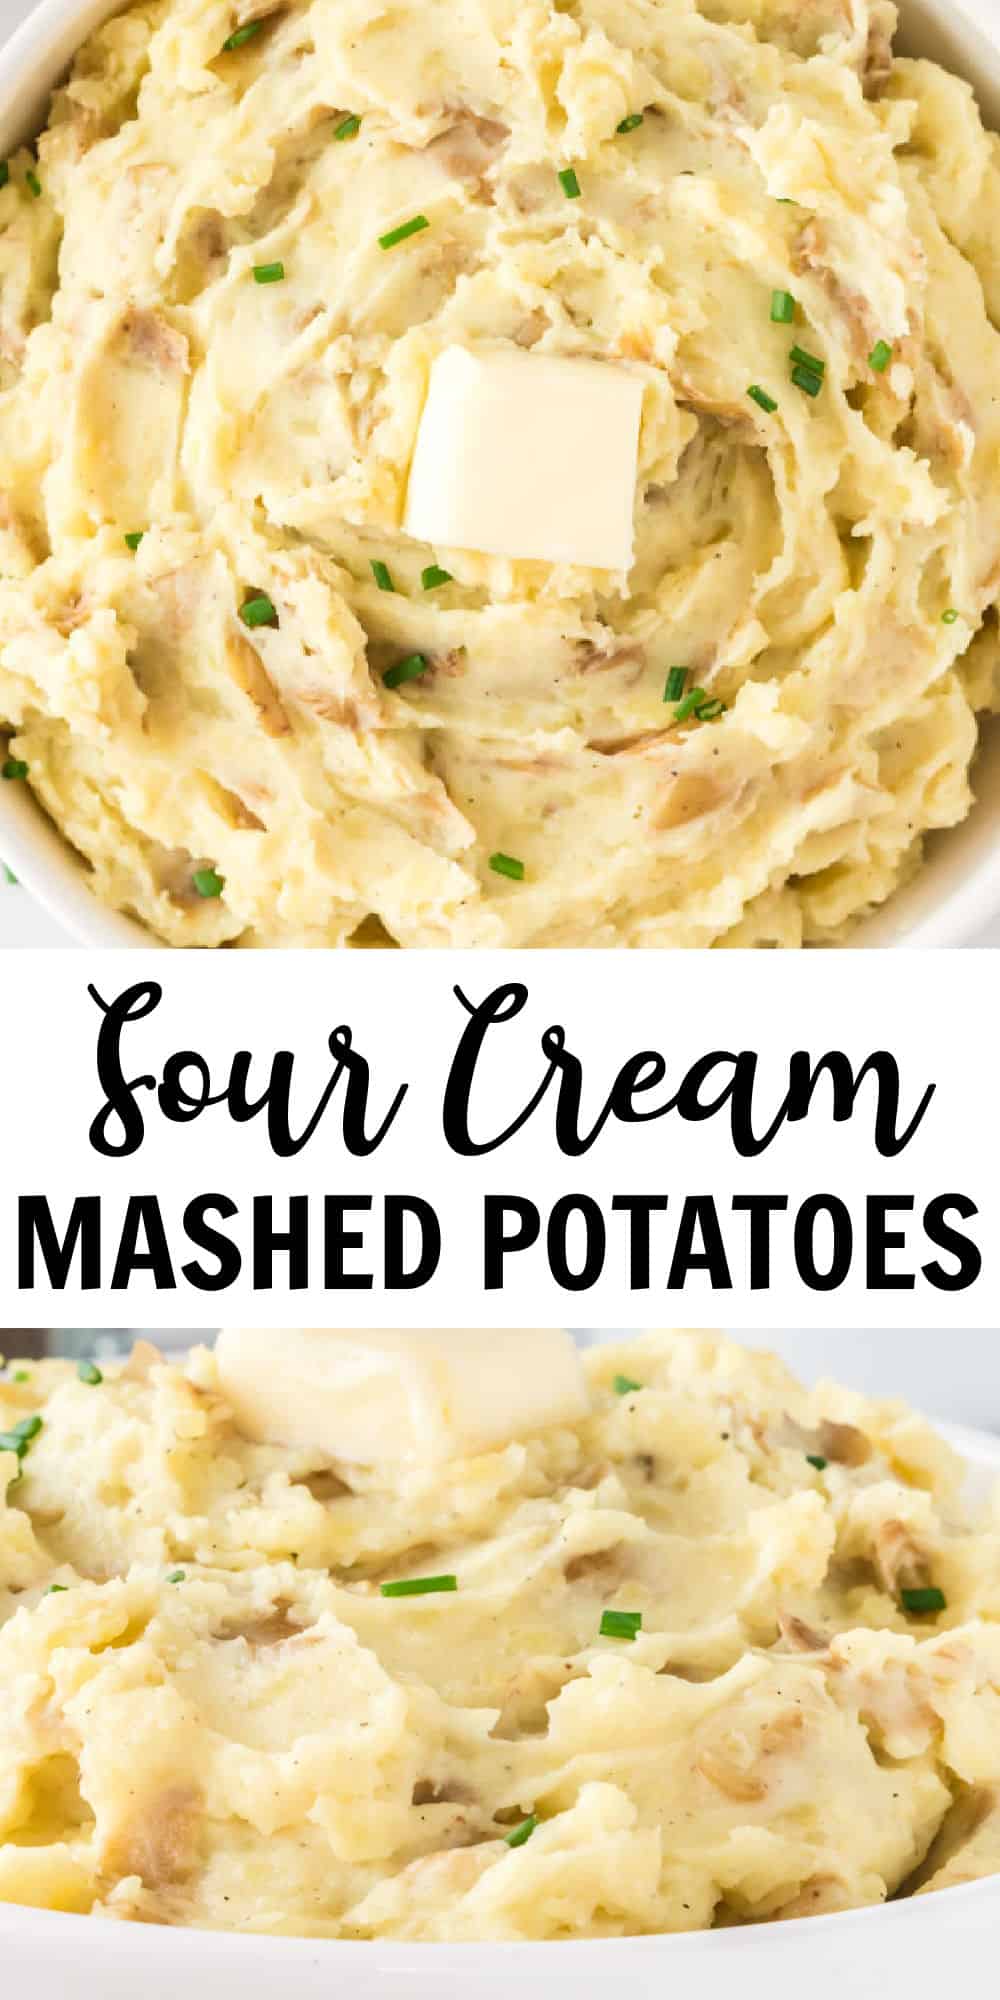 image with text "sour cream mashed potatoes"